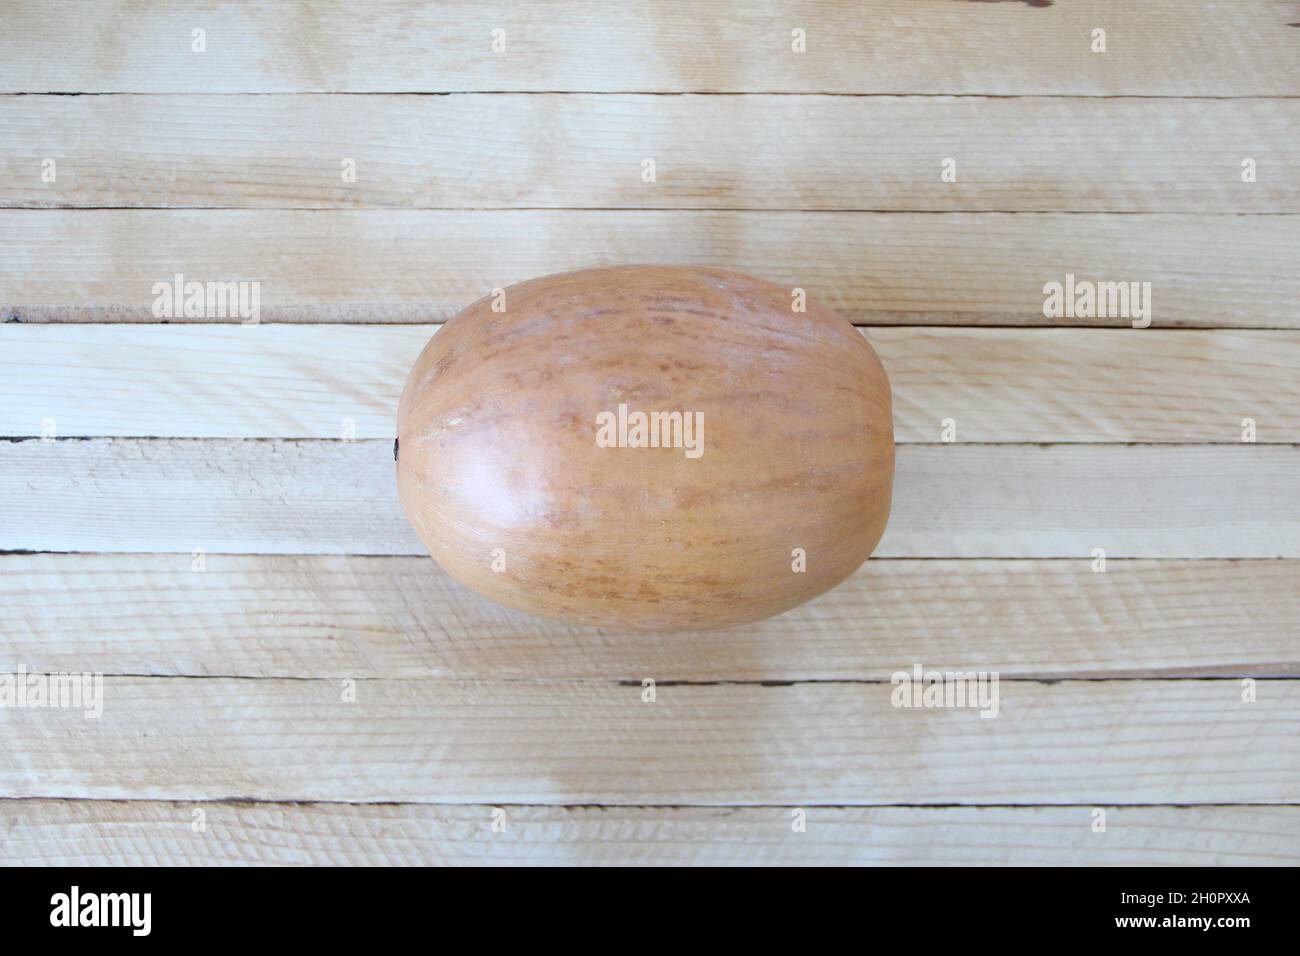 Small round pumpkin on the wooden background Stock Photo